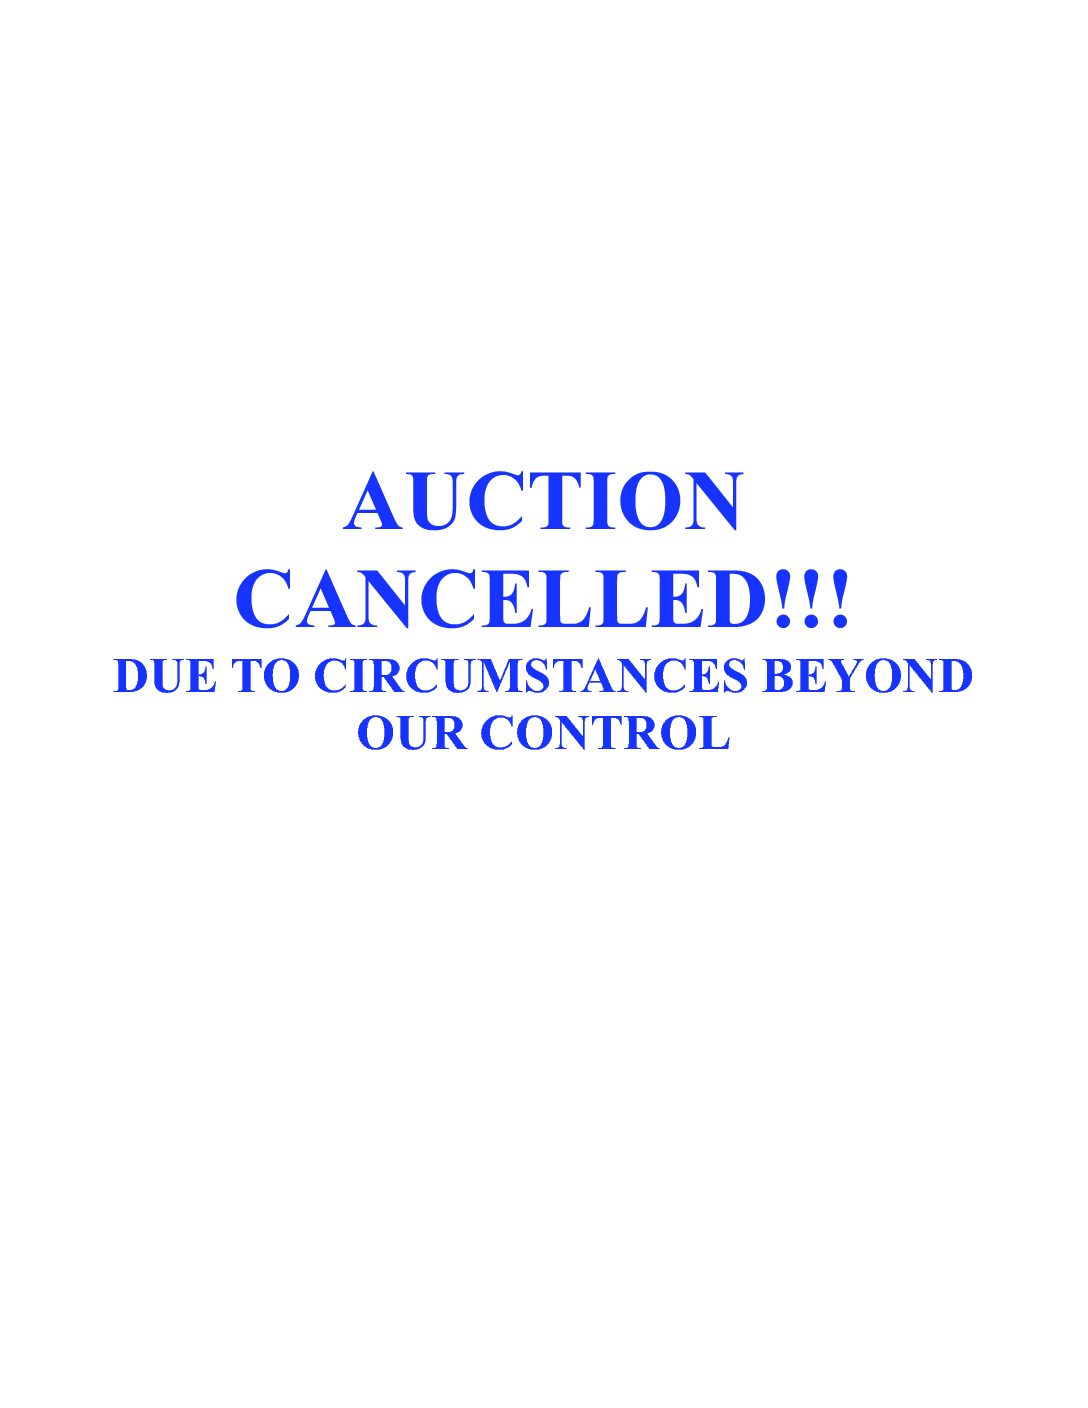 AUCTION CANCELLED